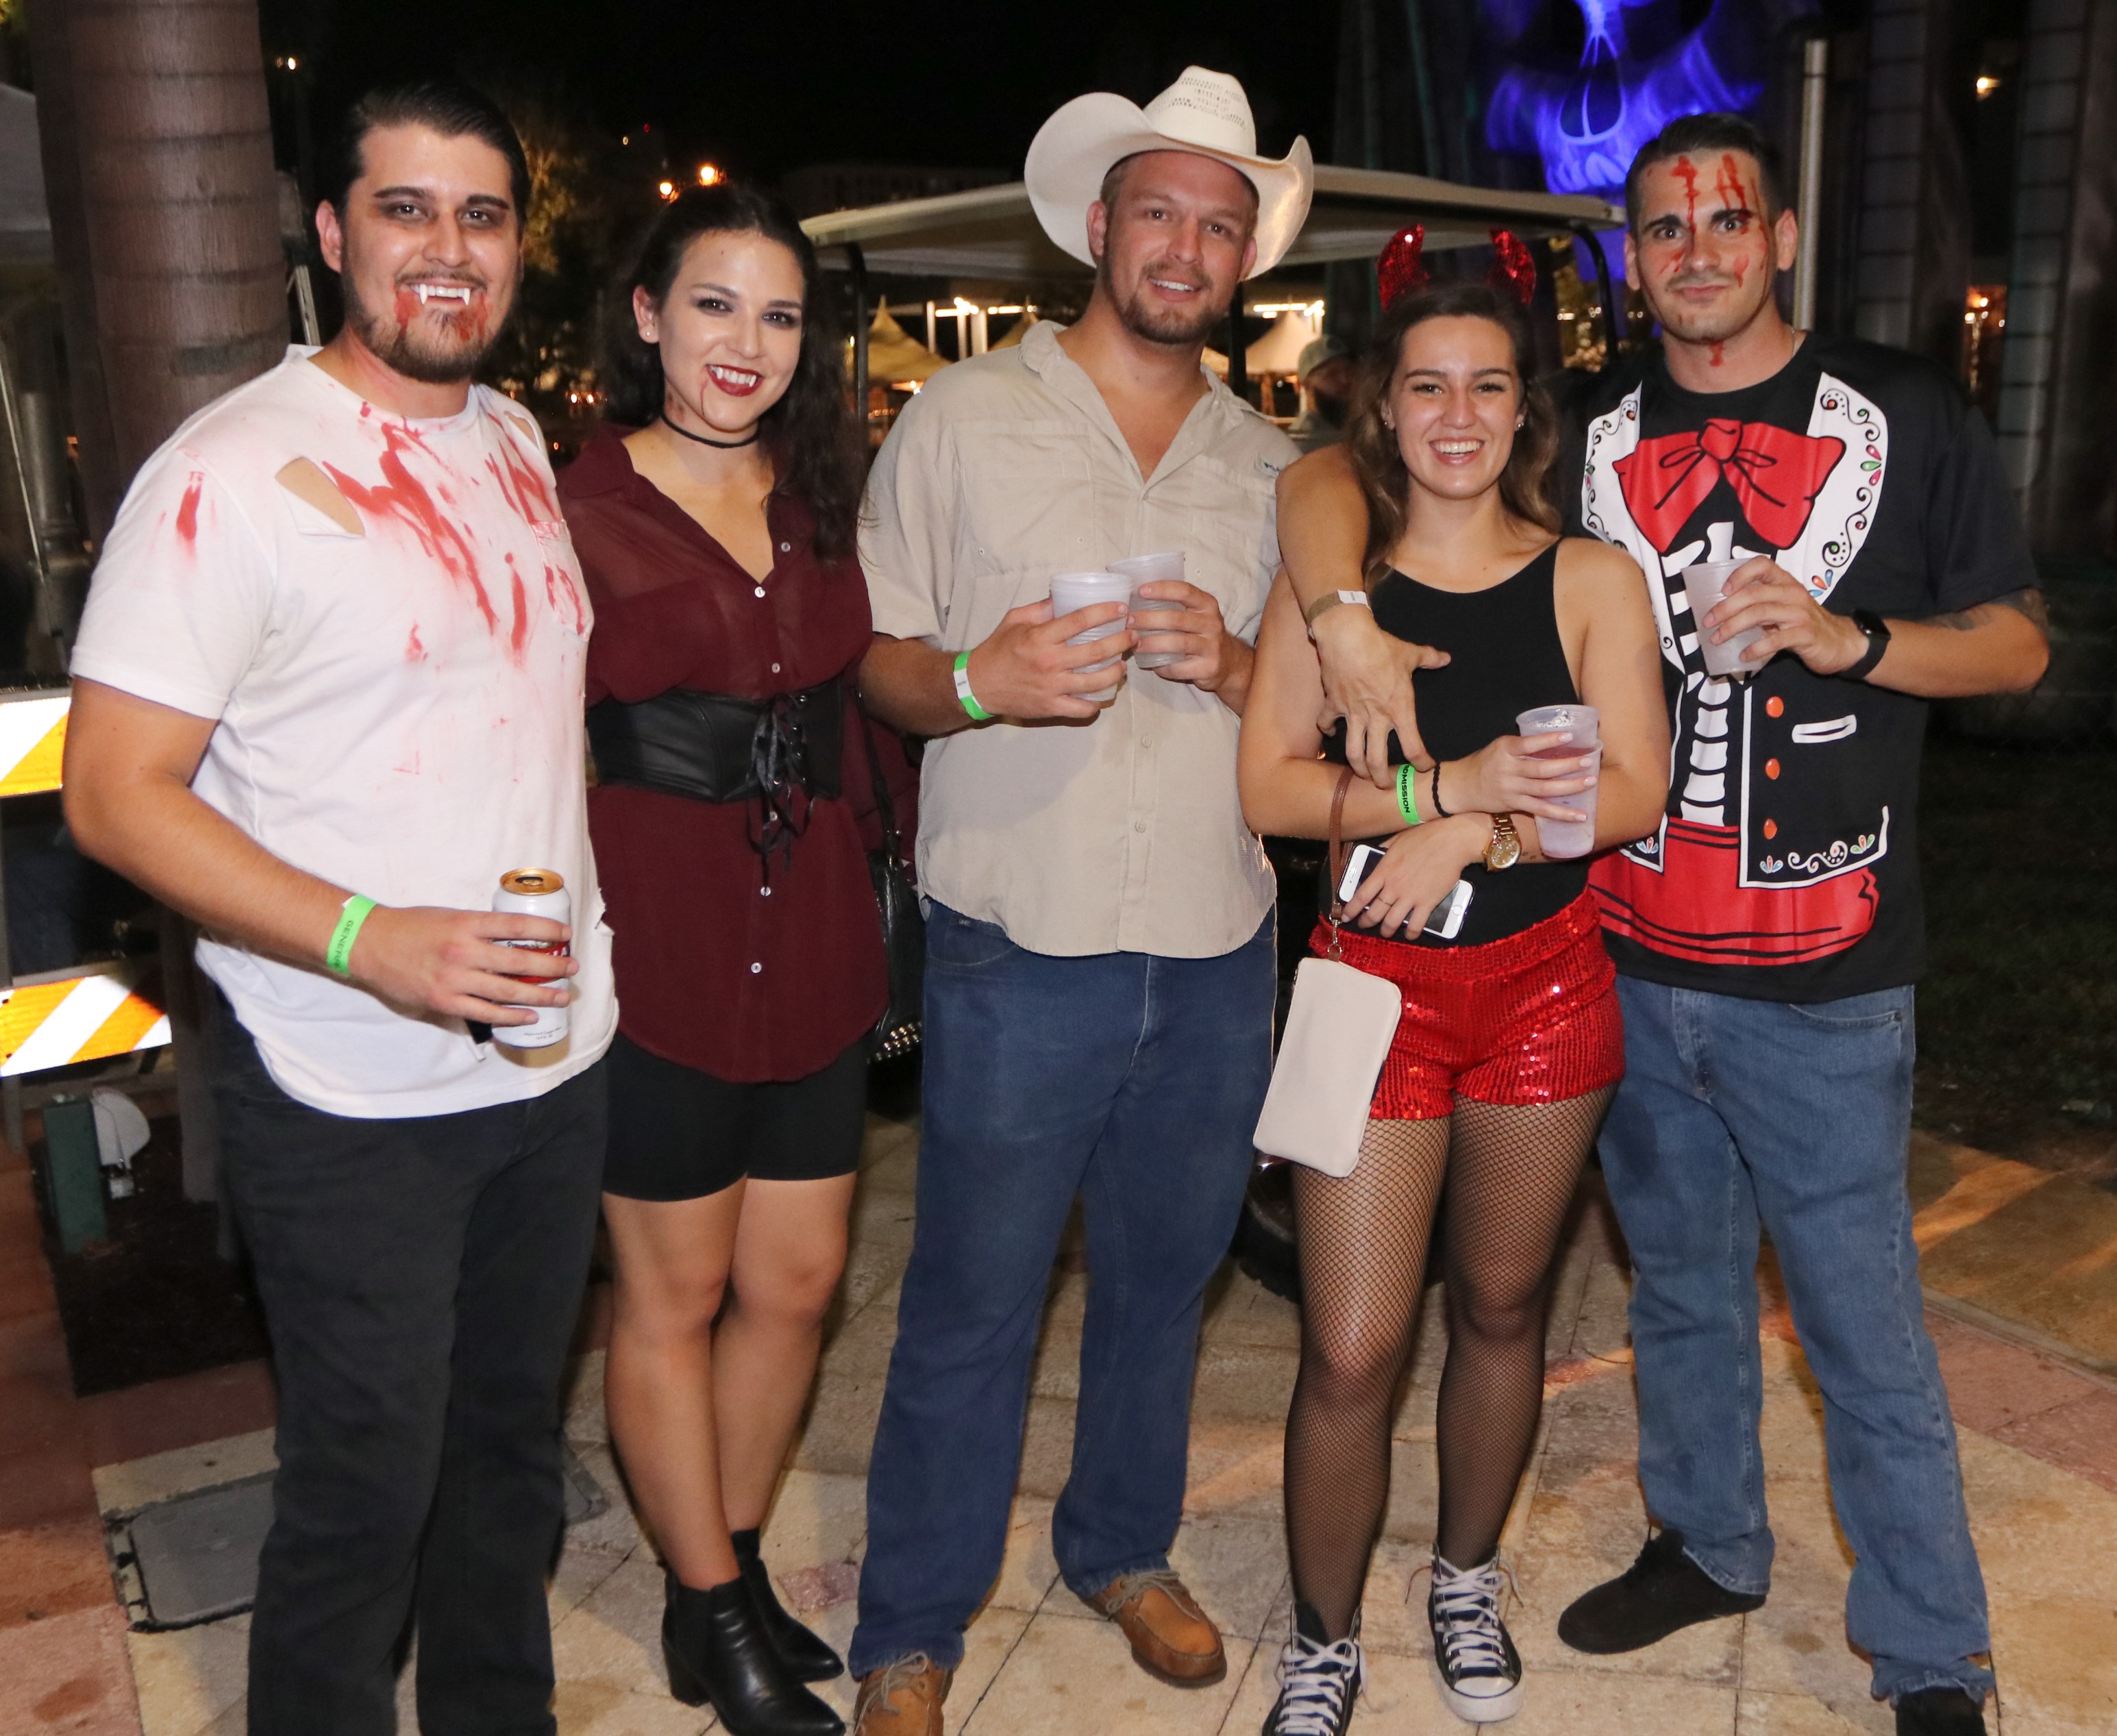 Cowboy got 2 drinks and 0 girls :( at Moonfest 2019 (photo by: Mike Jalches)